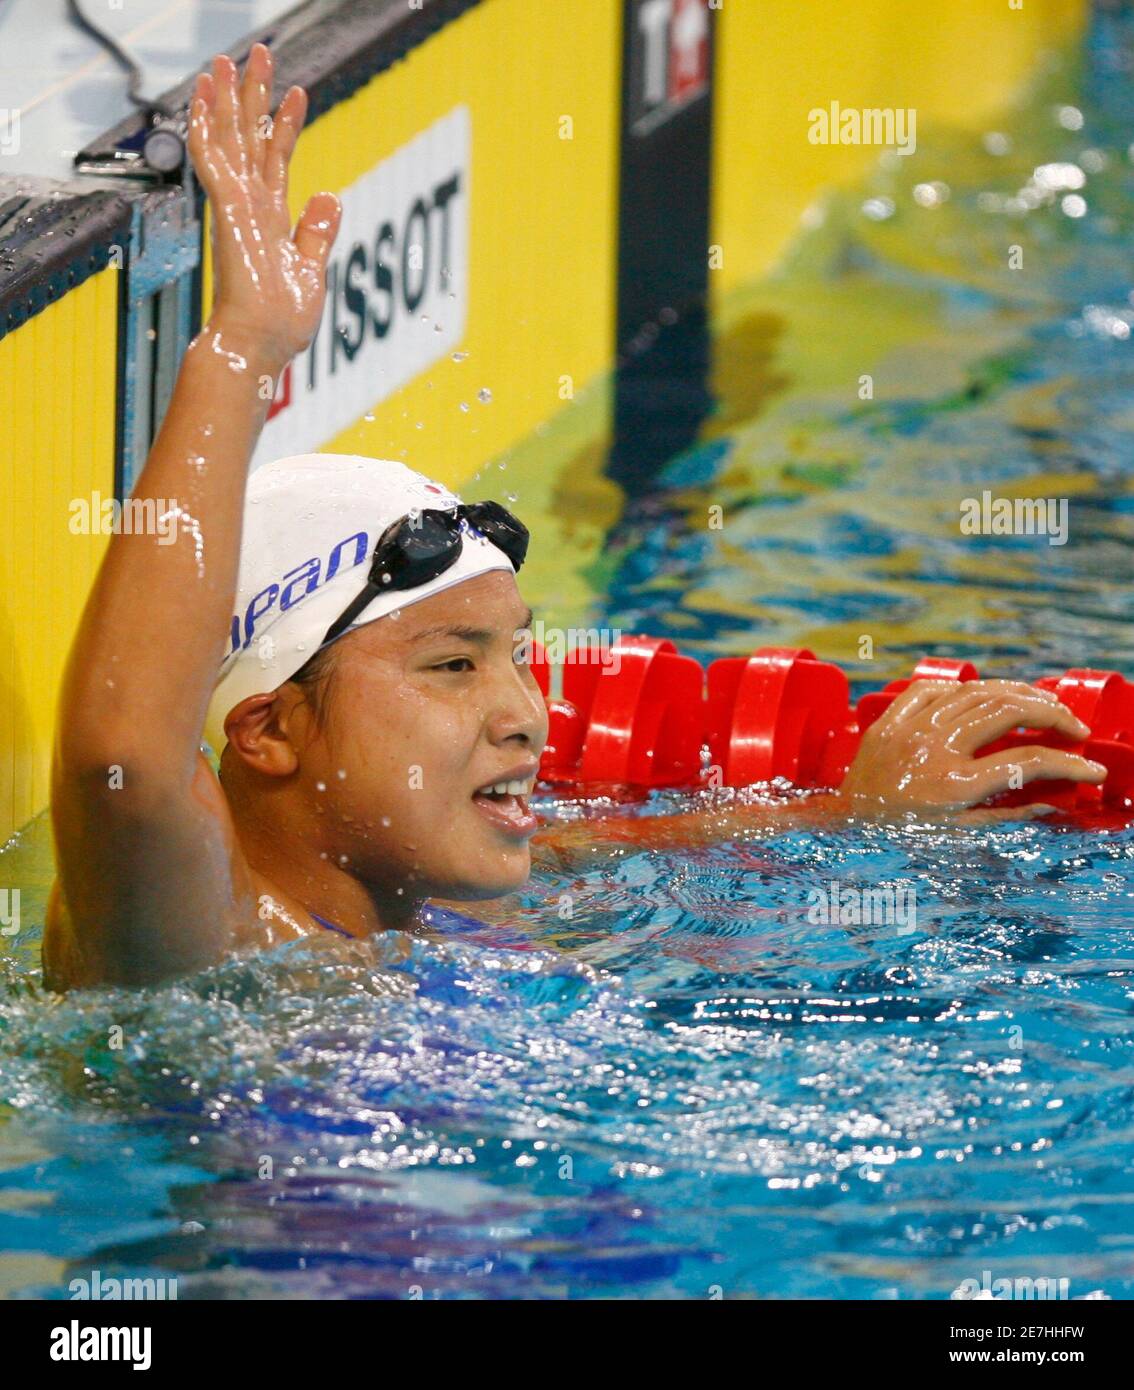 Japan's Yurie Yano waves after winning the women's 800m freestyle swimming  finals at the 15th Asian Games in Doha December 6, 2006. REUTERS/Jerry  Lampen (QATAR Stock Photo - Alamy